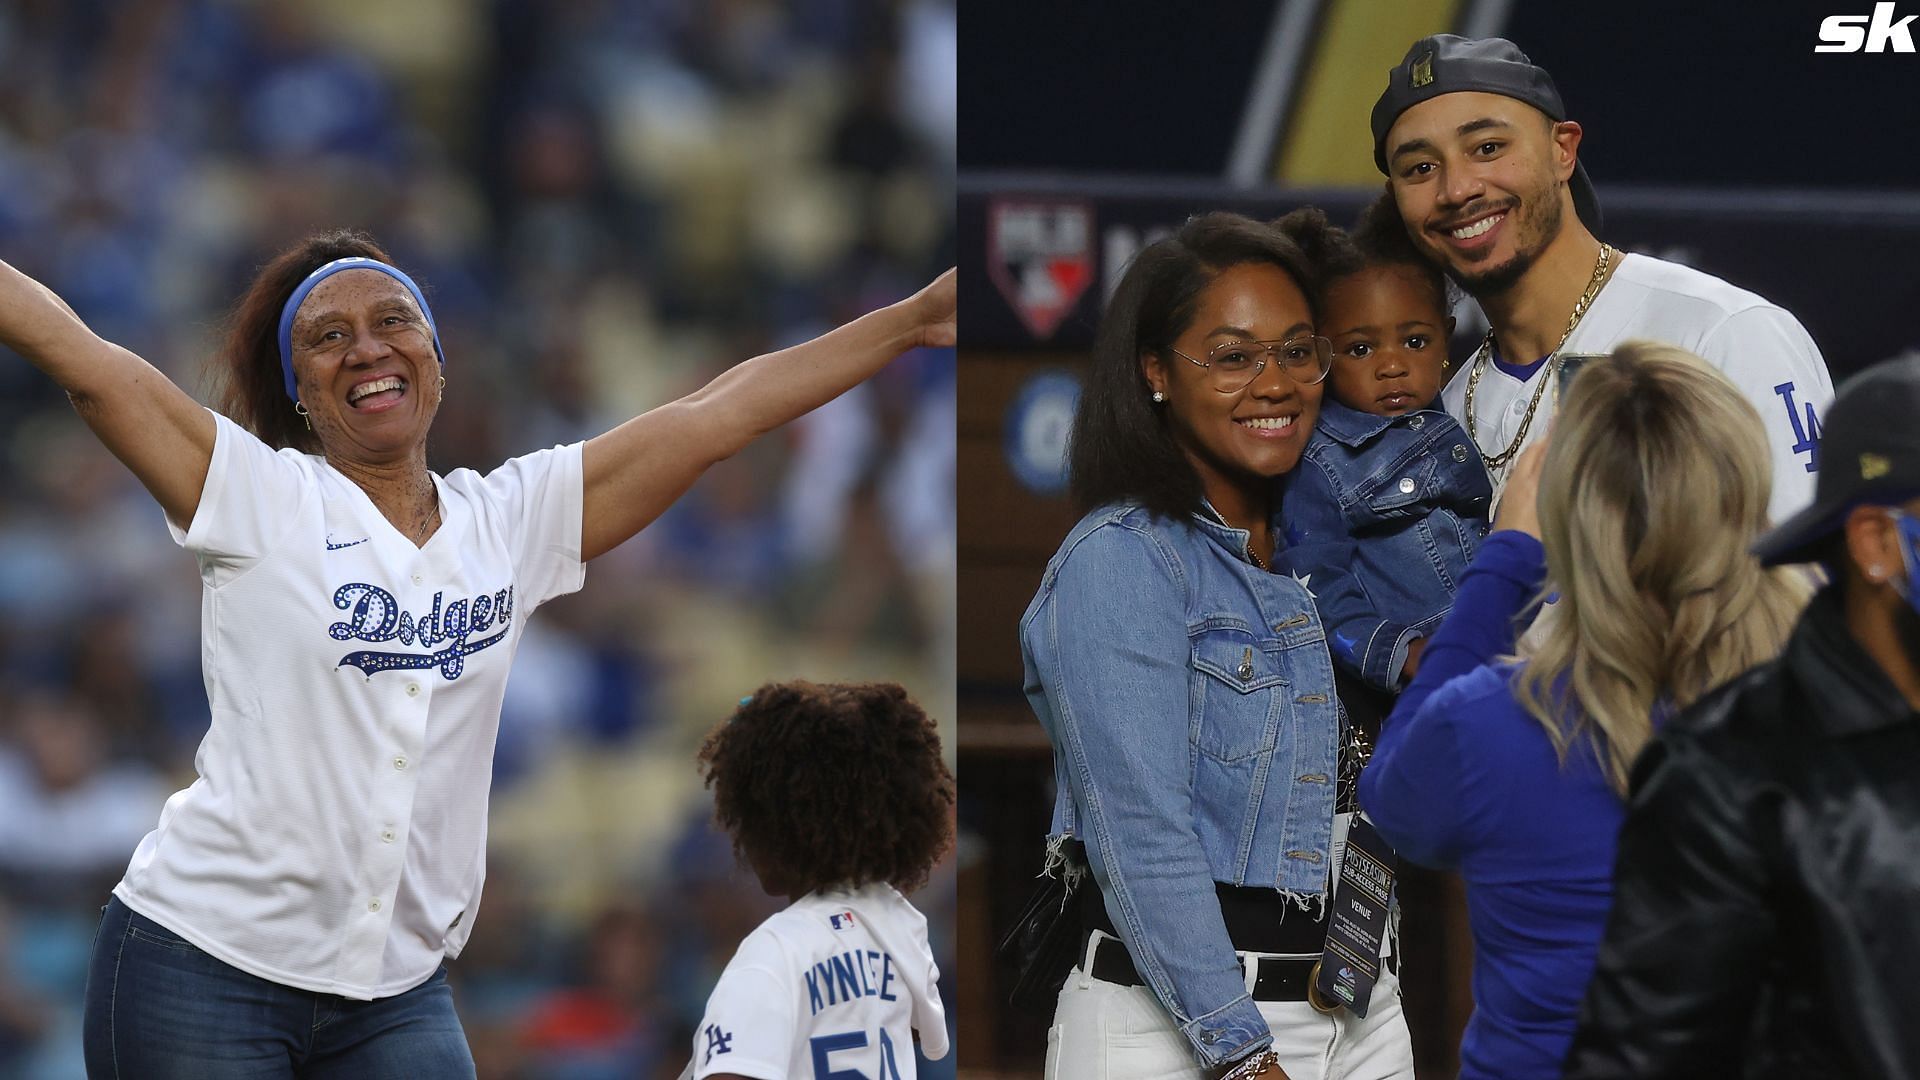 Mother of Mookie Betts of the Los Angeles Dodgers Diana Benedict reacts on the mound before throwing out a ceremonial first pitch before the game against the Arizona Diamondbacks at Dodger Stadium